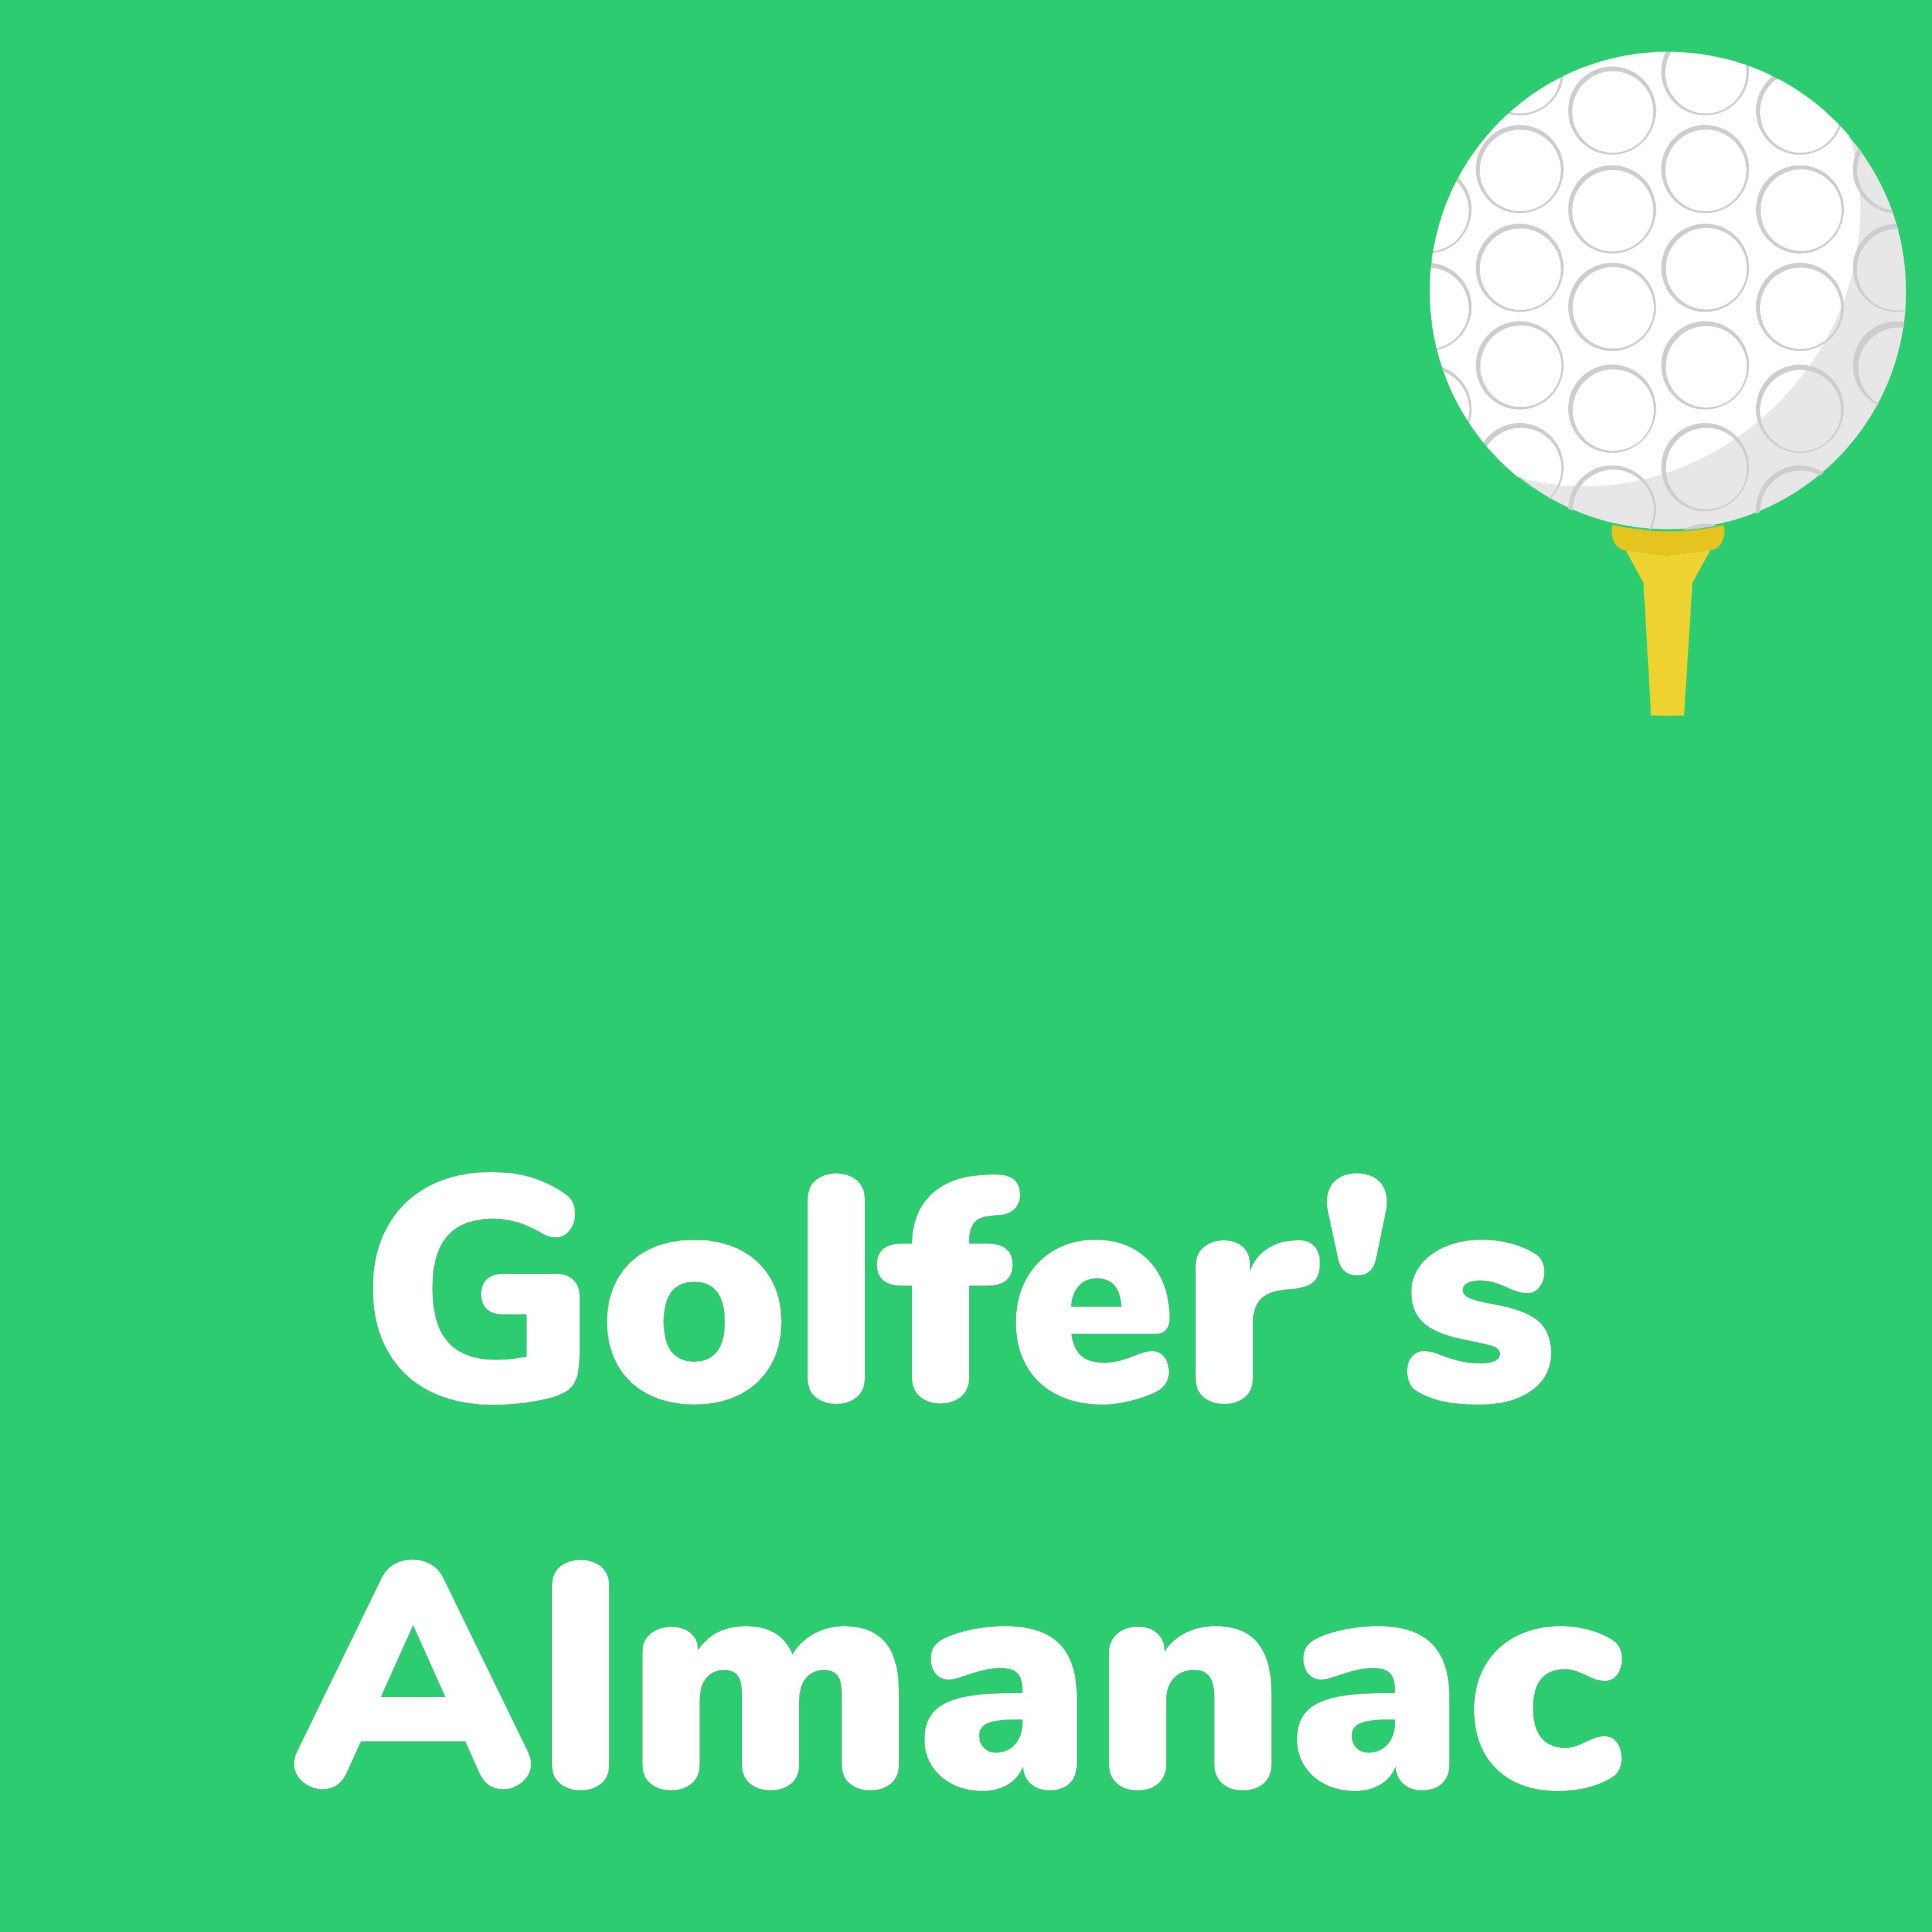 Golf History from Your Golfers Almanac cover art and Logo by Michael Duranko of GolfToons